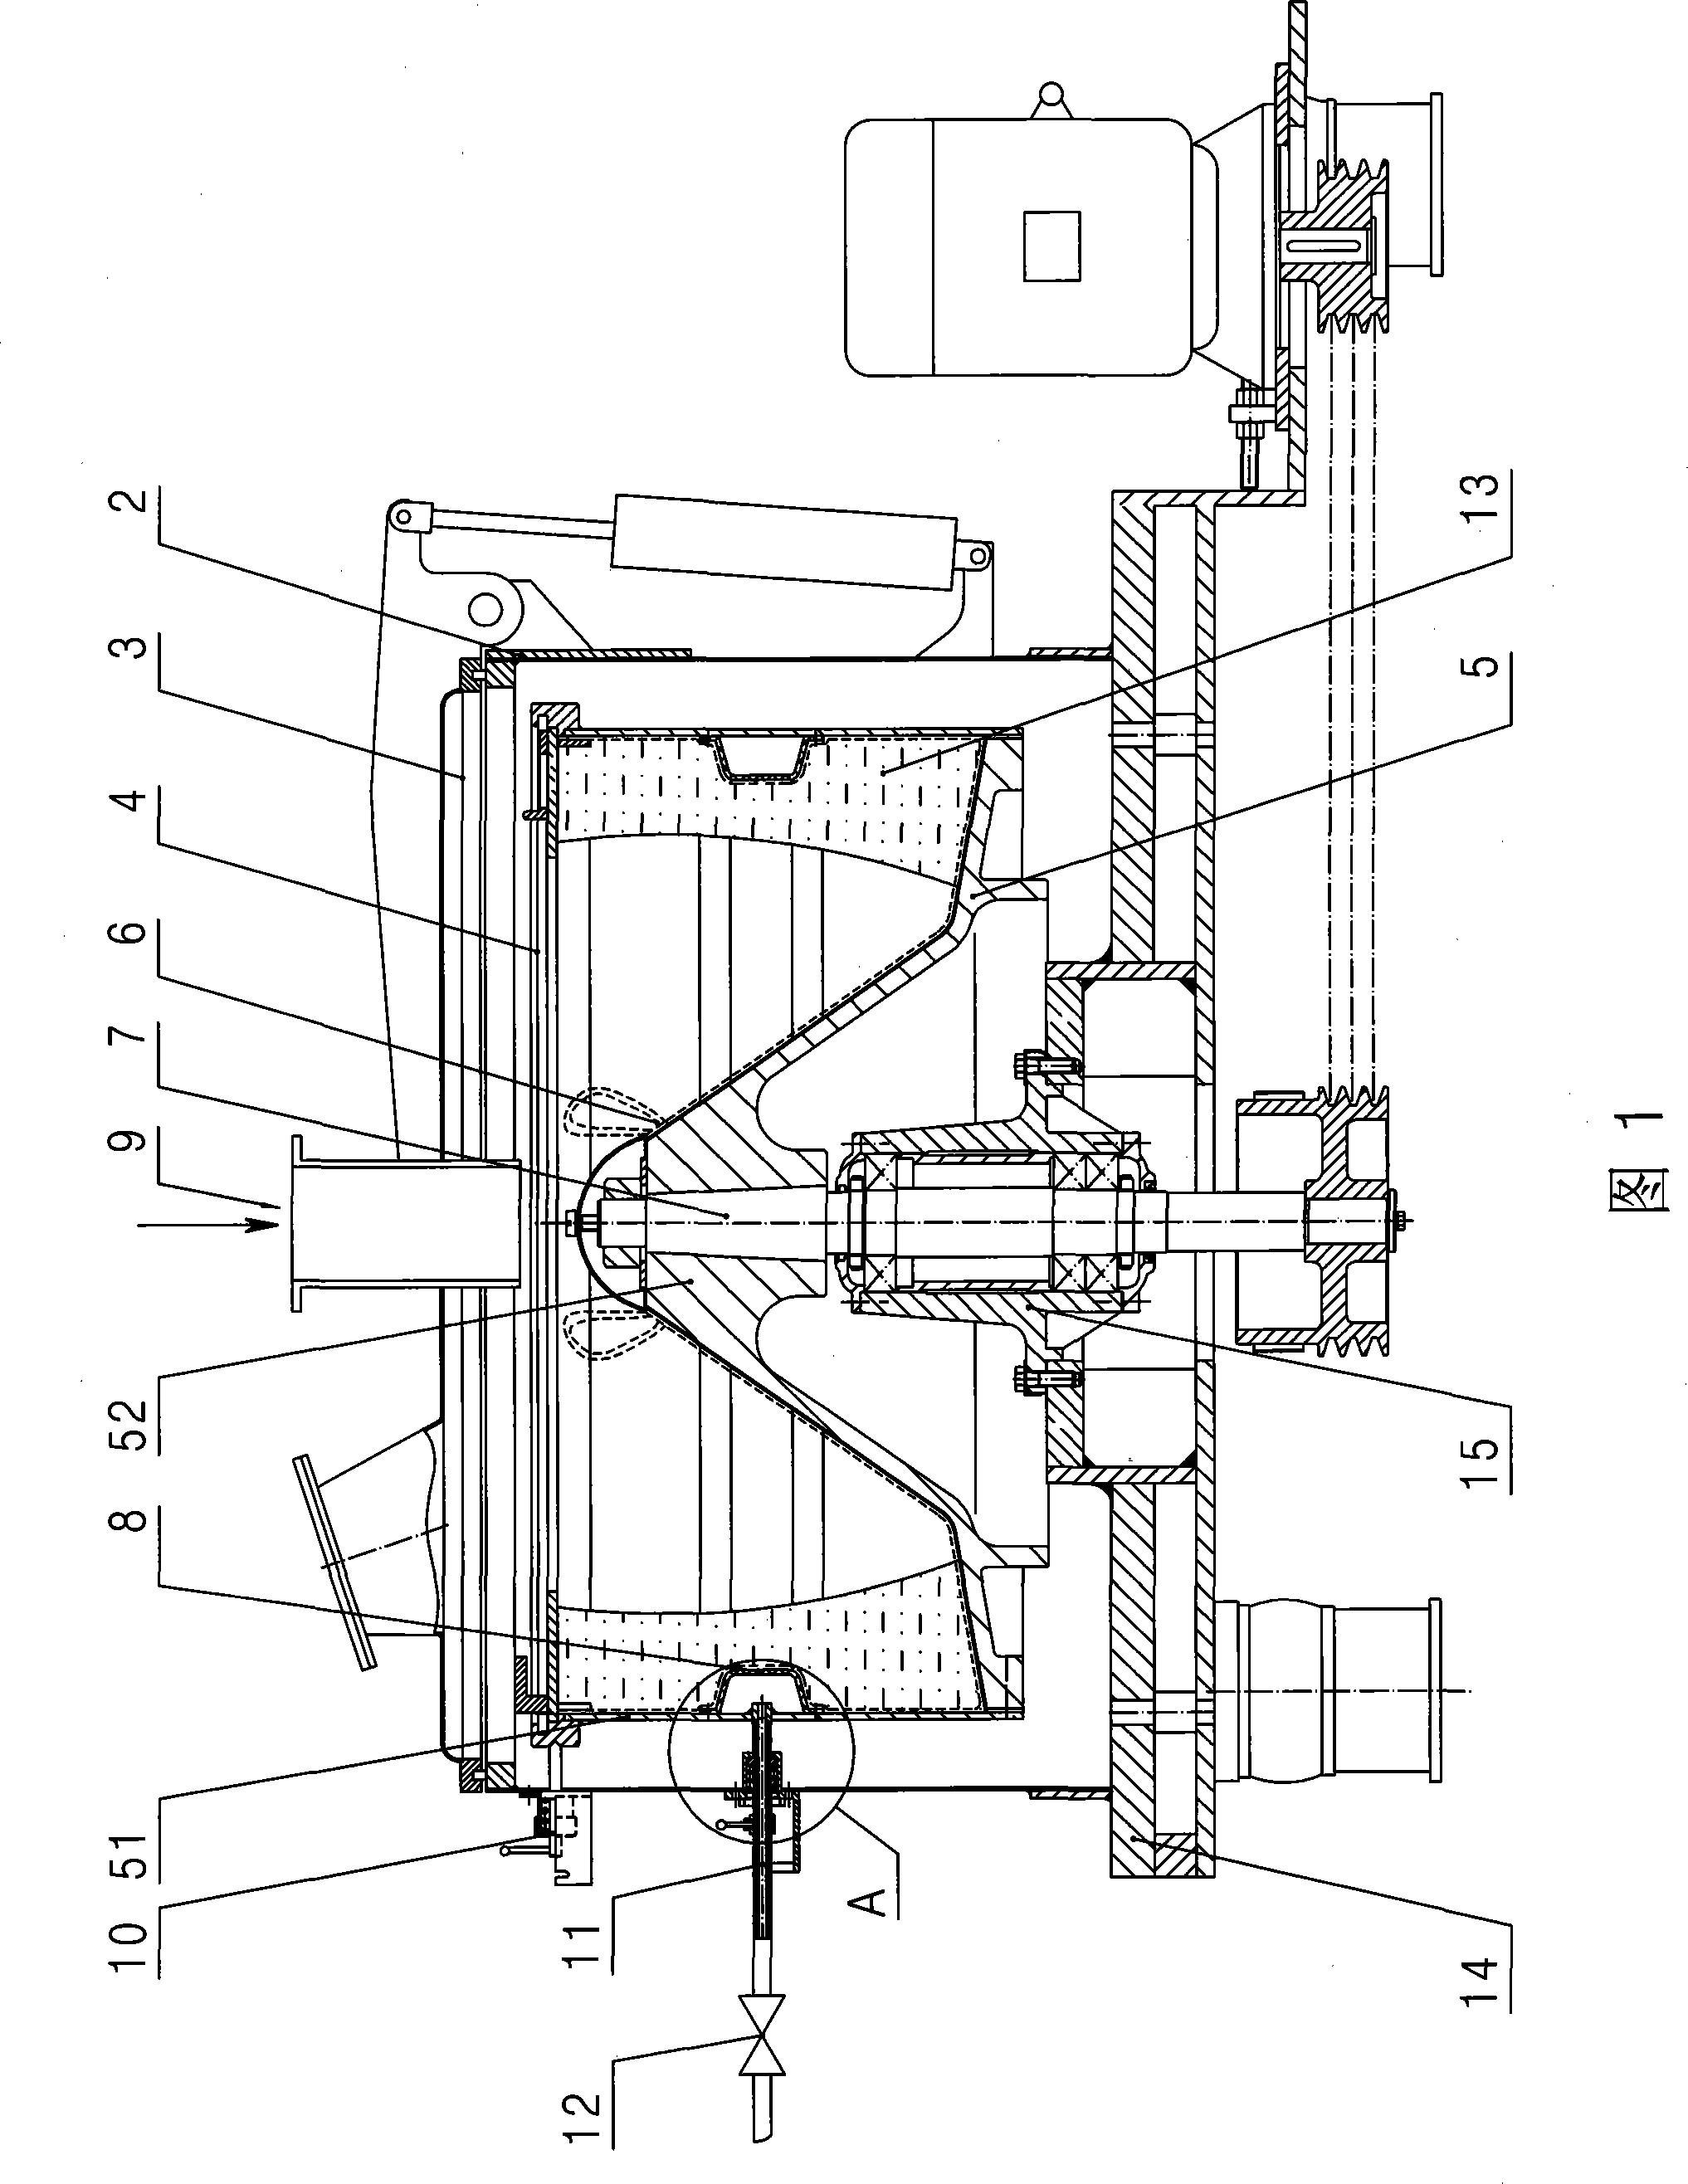 Bag extrusion device of the hanging bag type centrifugal machine